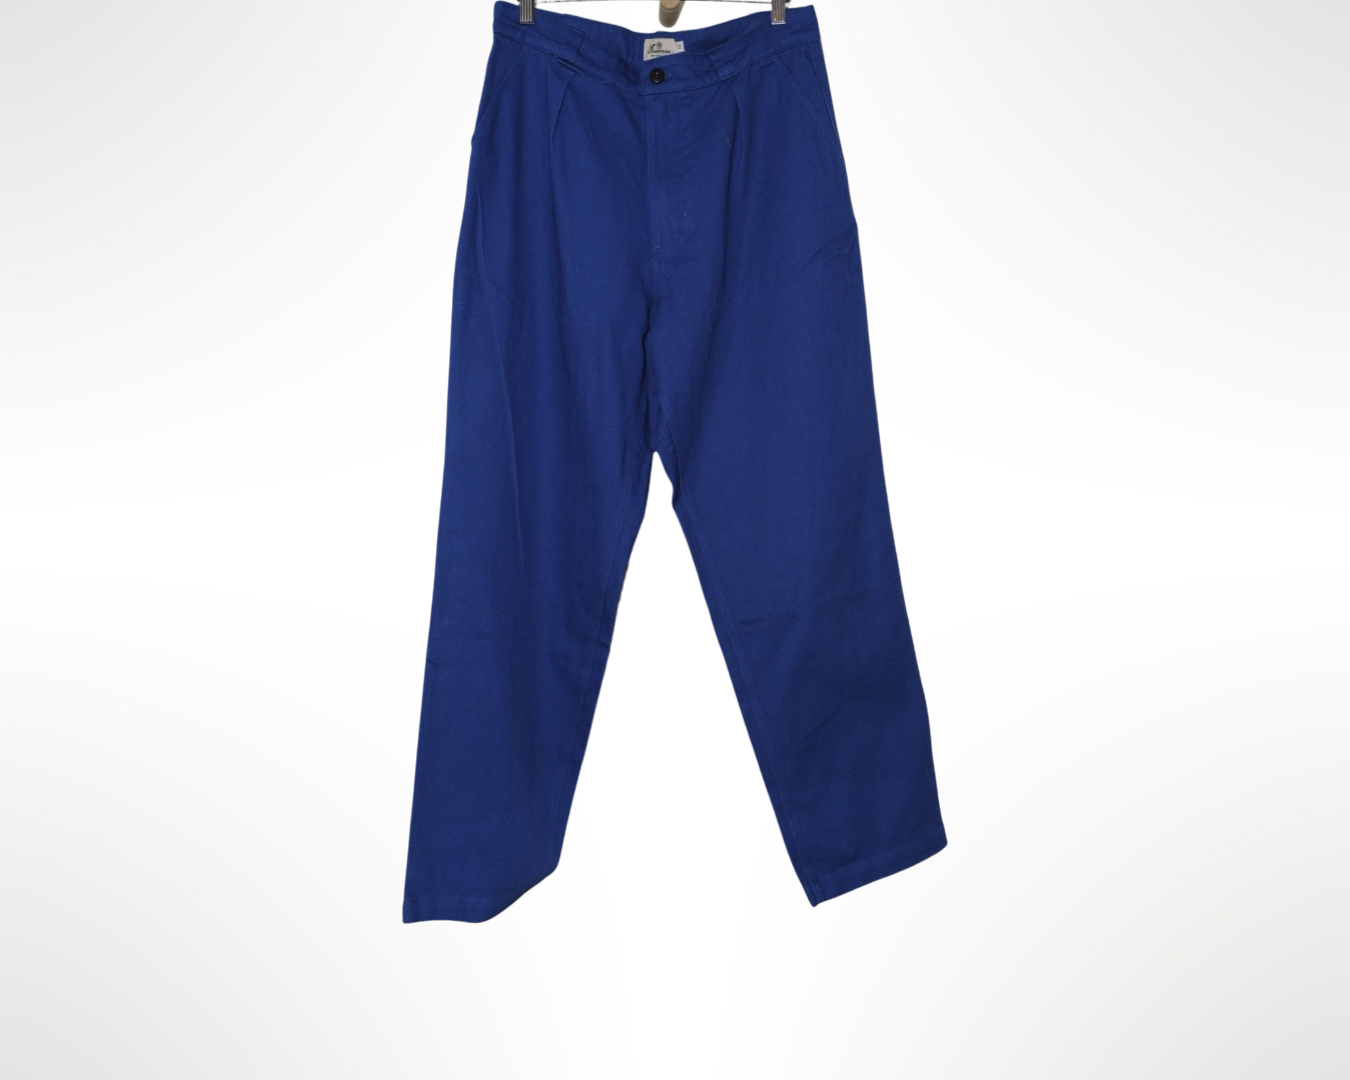 twill chore pants in cobalt